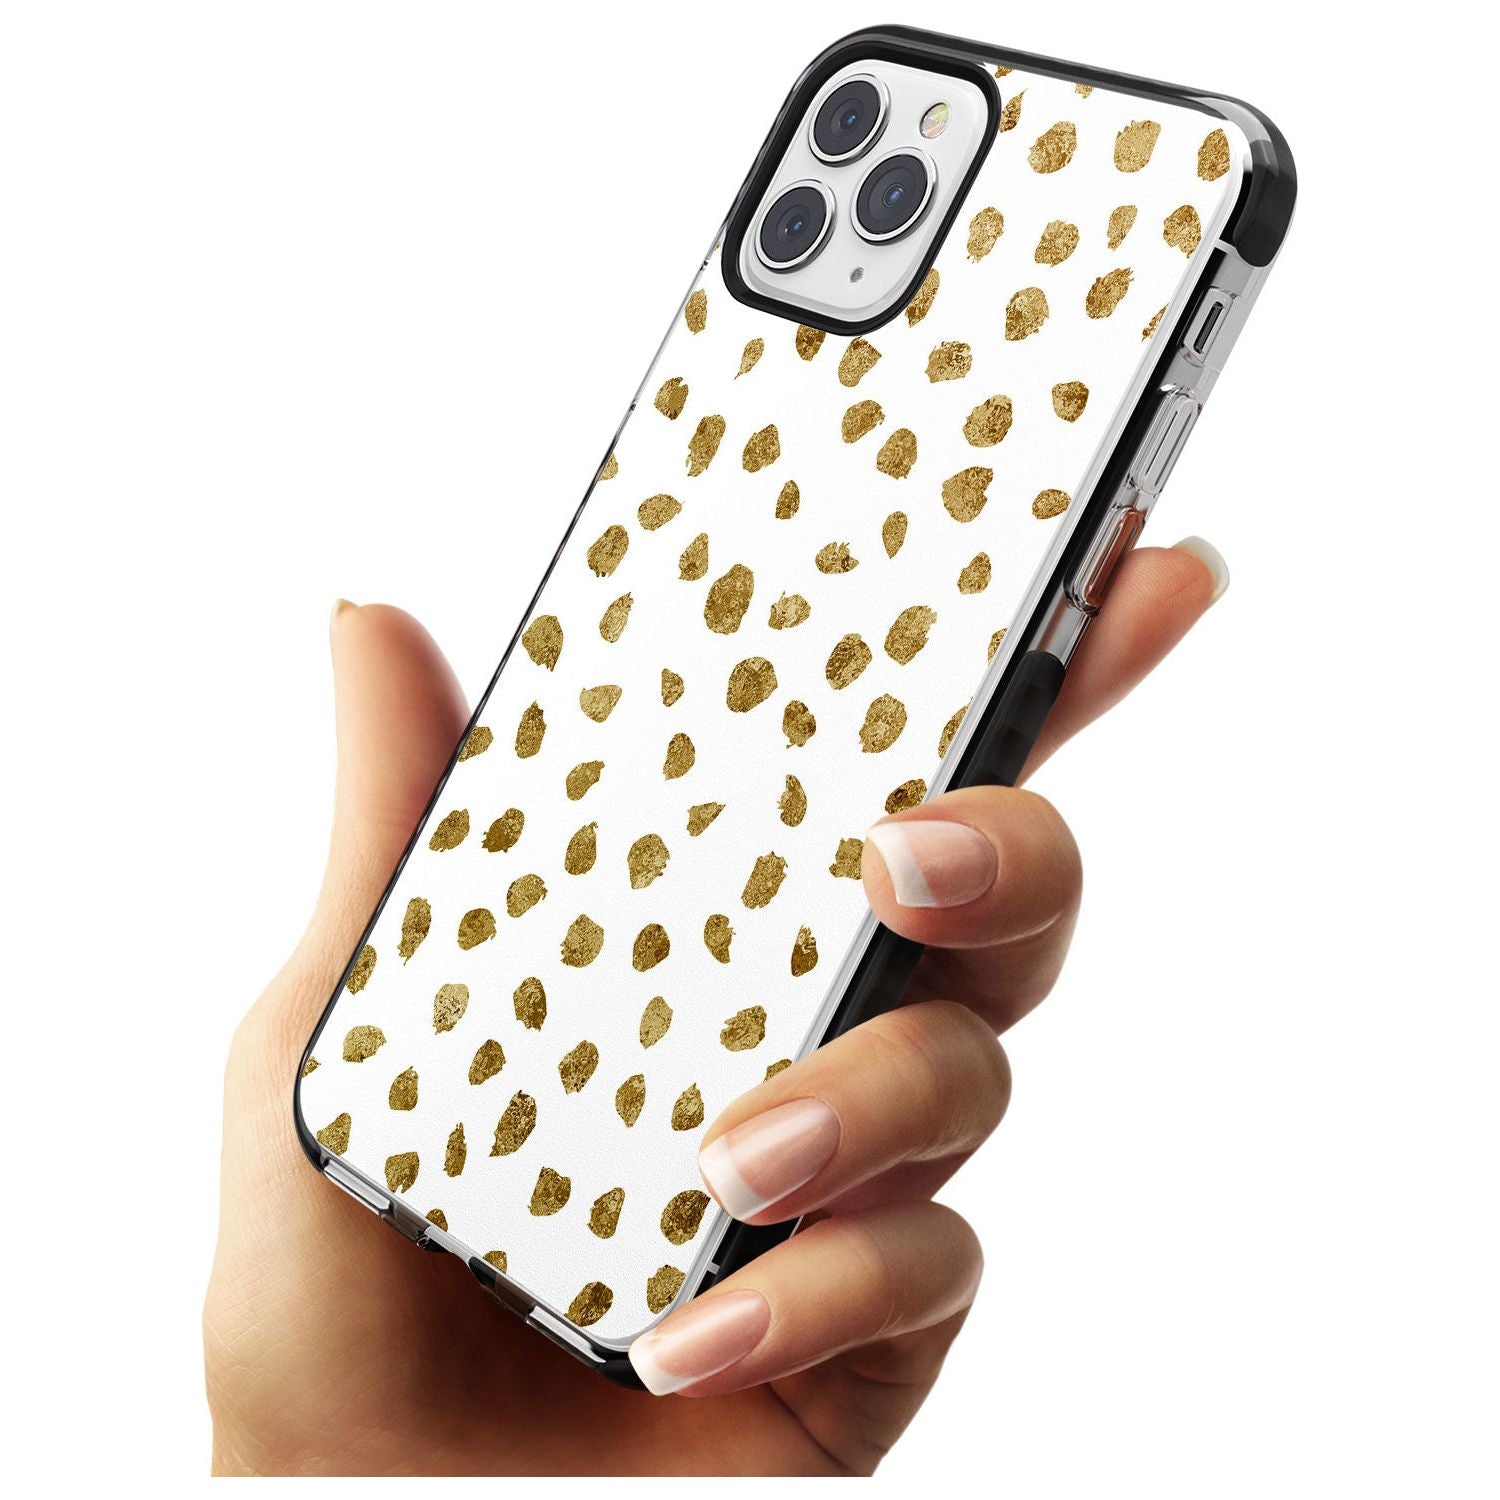 Gold Look on White Dalmatian Polka Dot Spots Black Impact Phone Case for iPhone 11 Pro Max